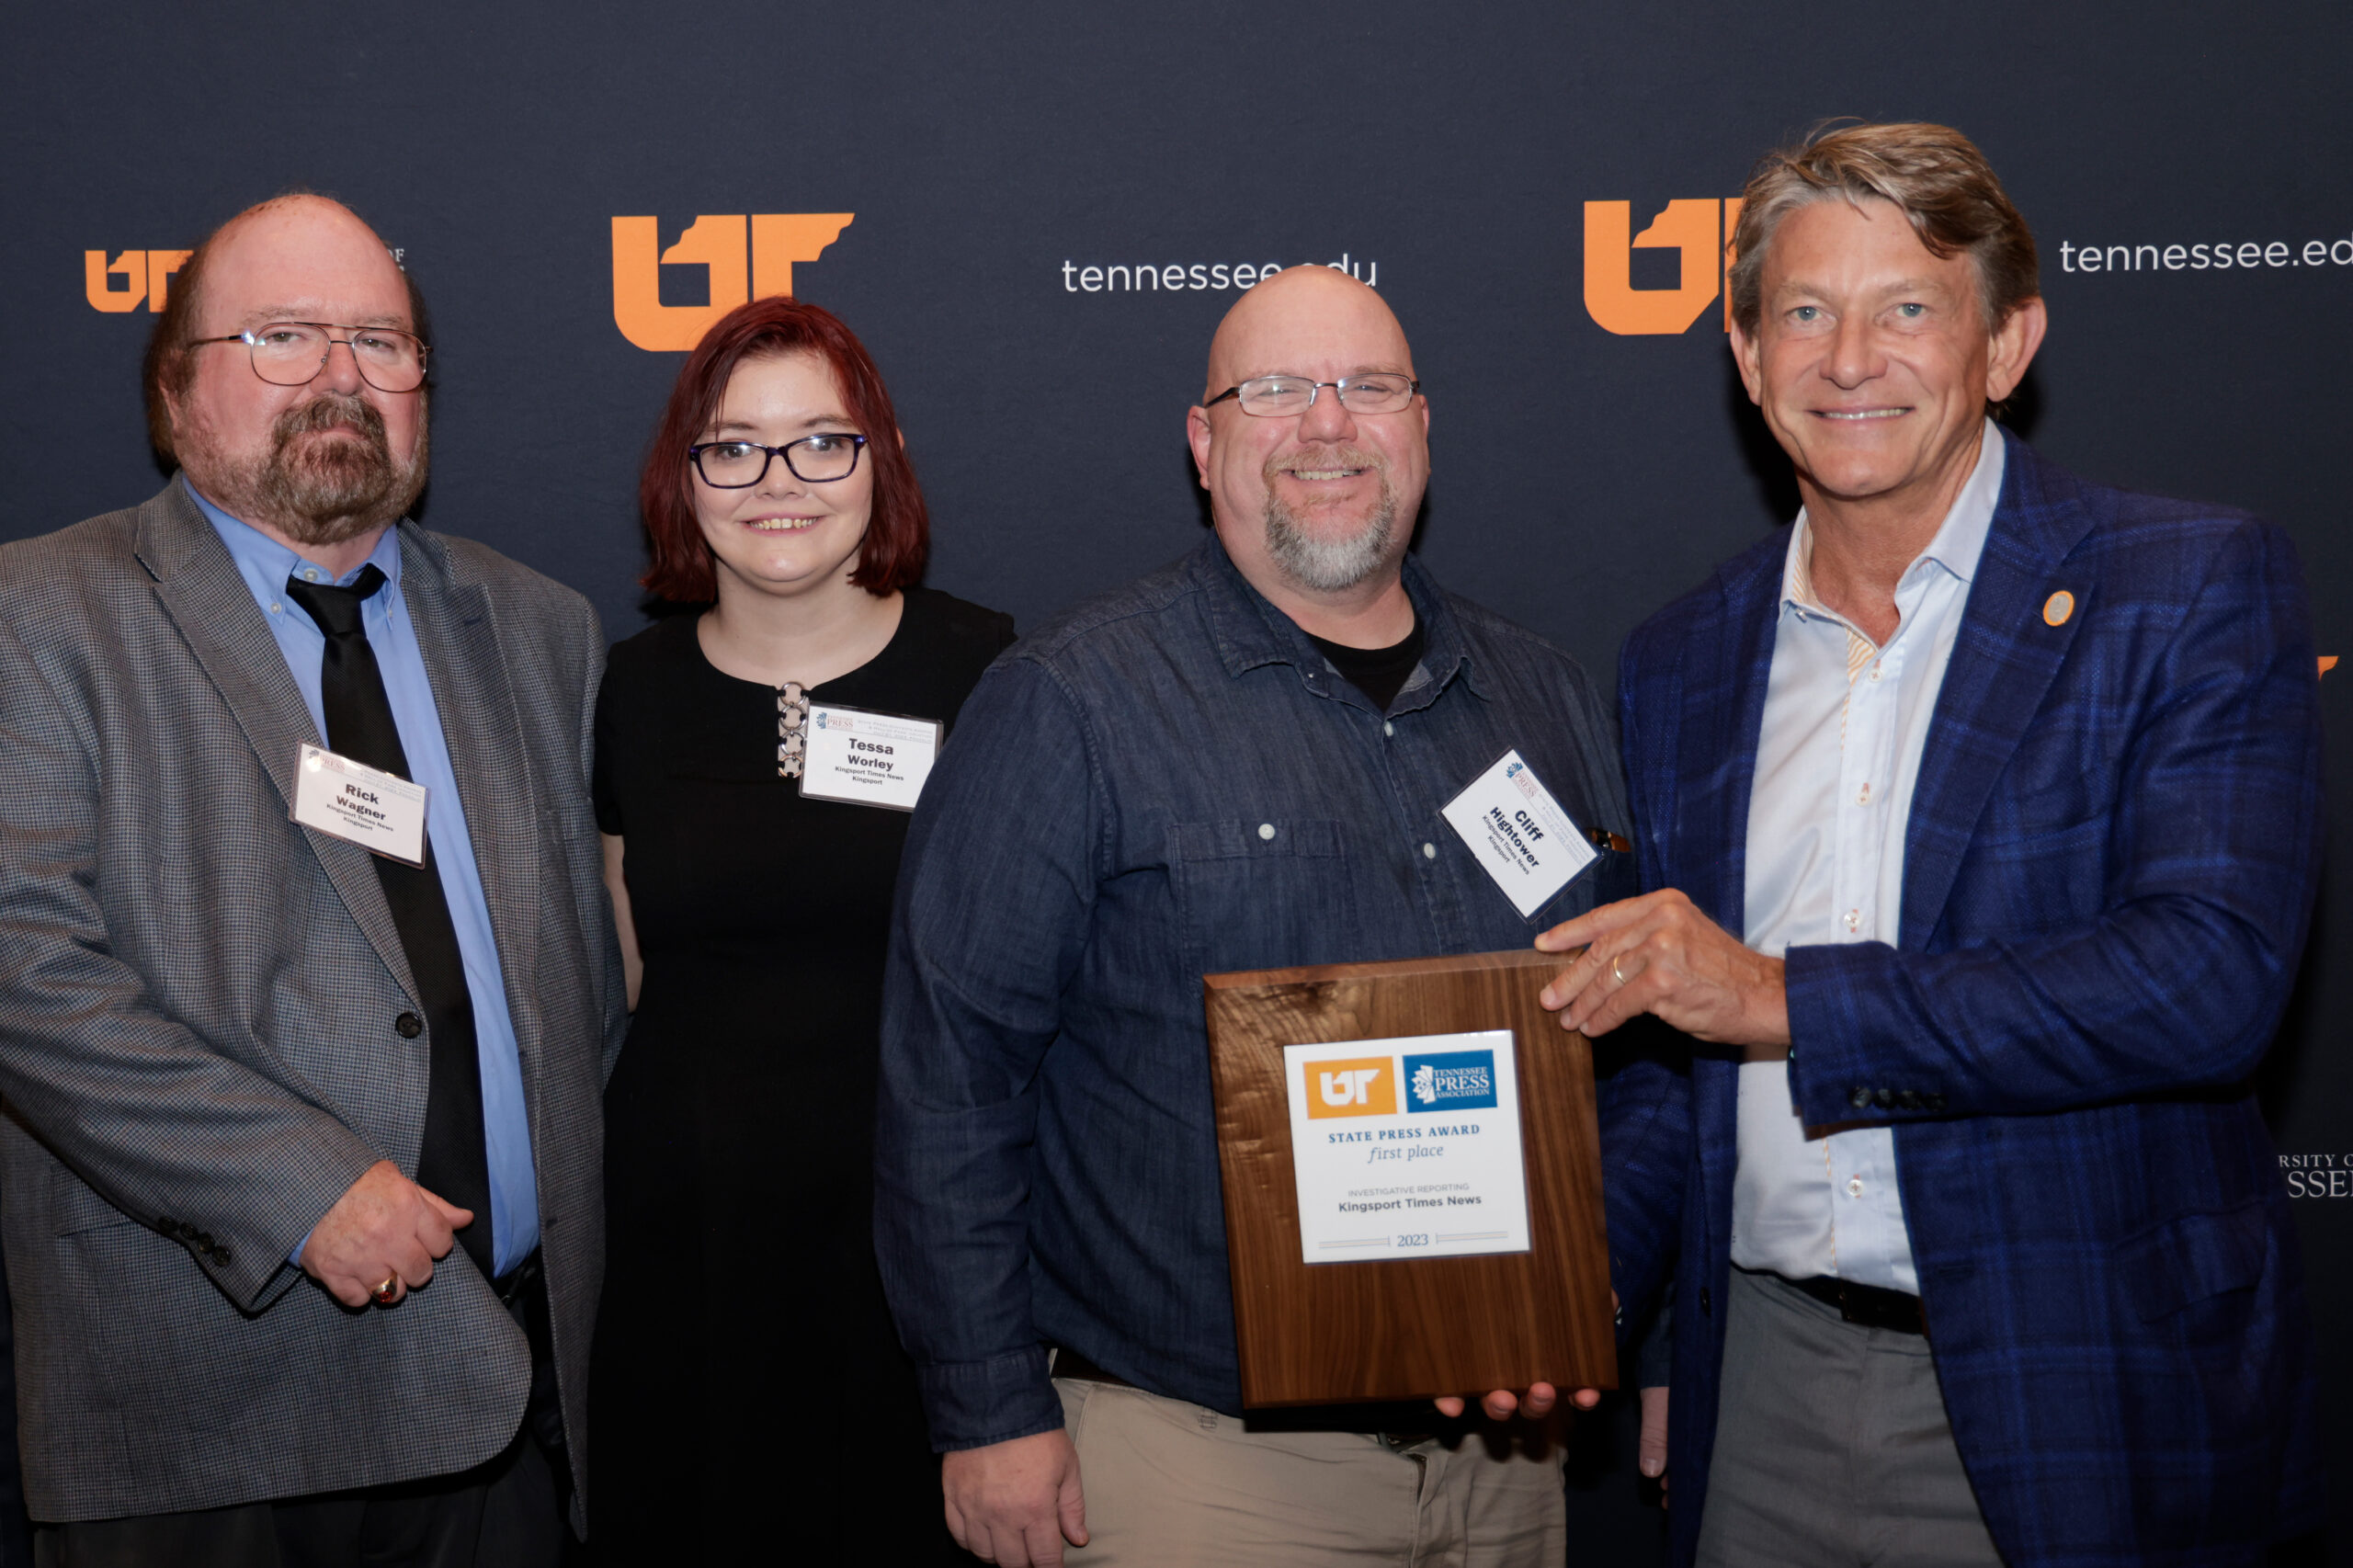 Members of the Kingsport Times News with UT System President Randy Boyd (far right).